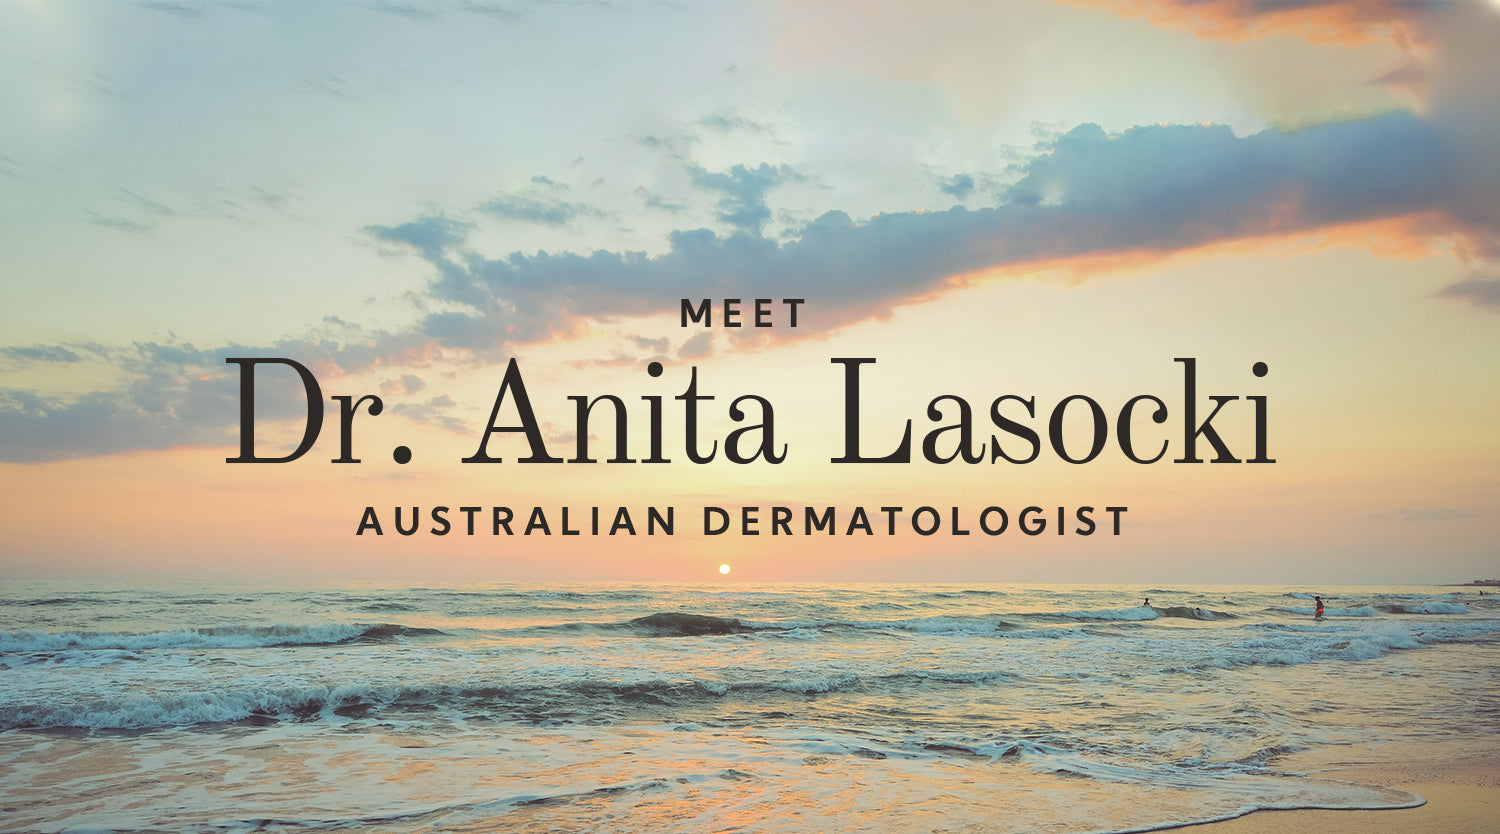 We've got you covered series with Dr. Anita Lasocki